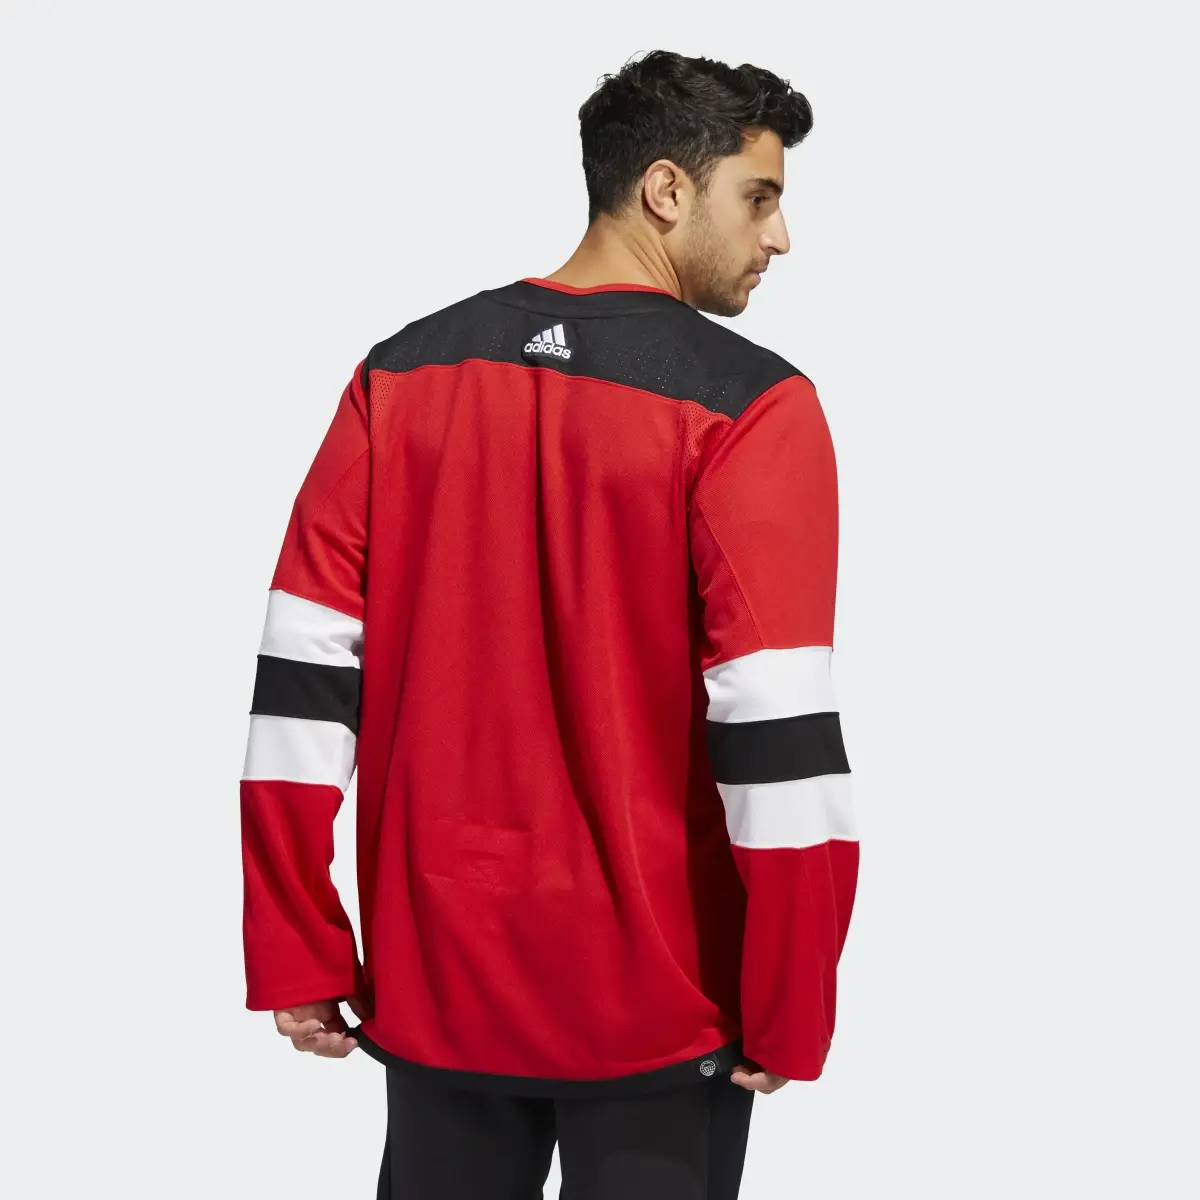 Adidas Devils Home Authentic Jersey. 3